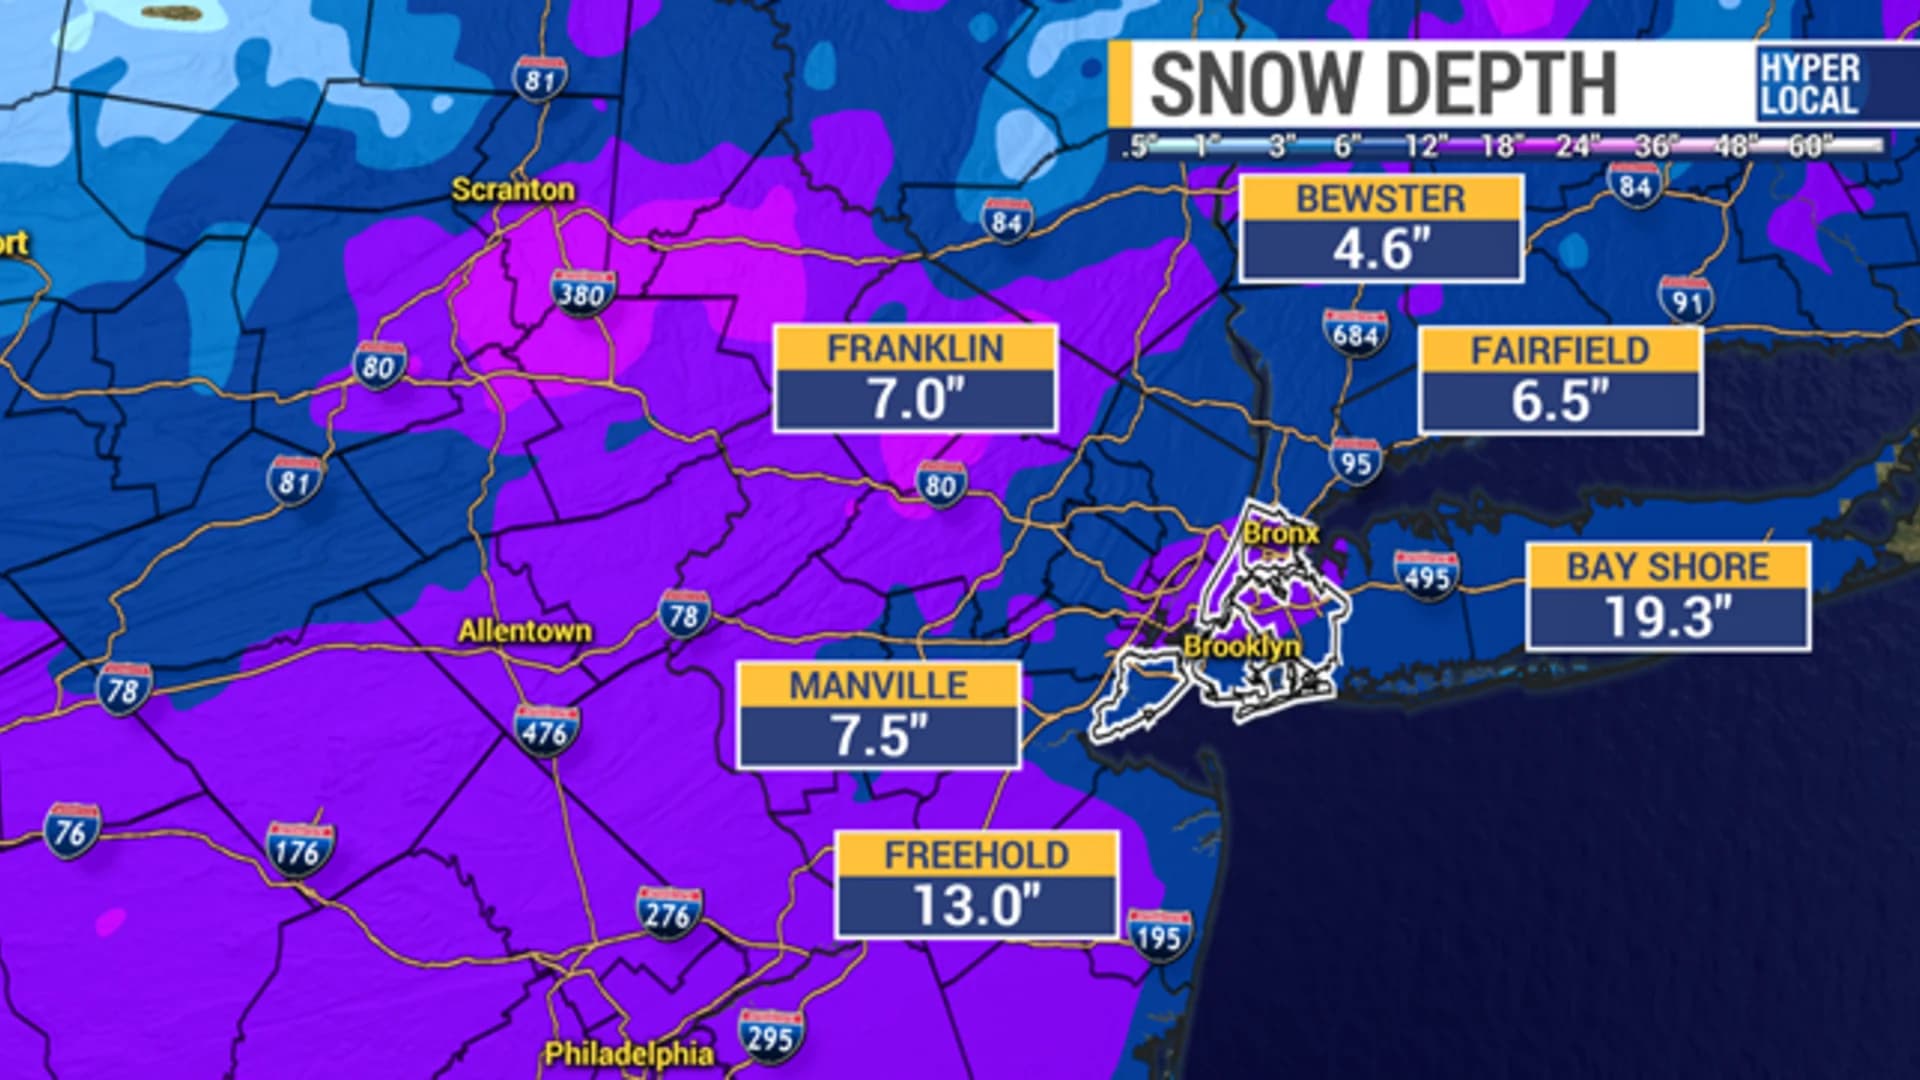 Snowfall totals for March 21 nor'easter